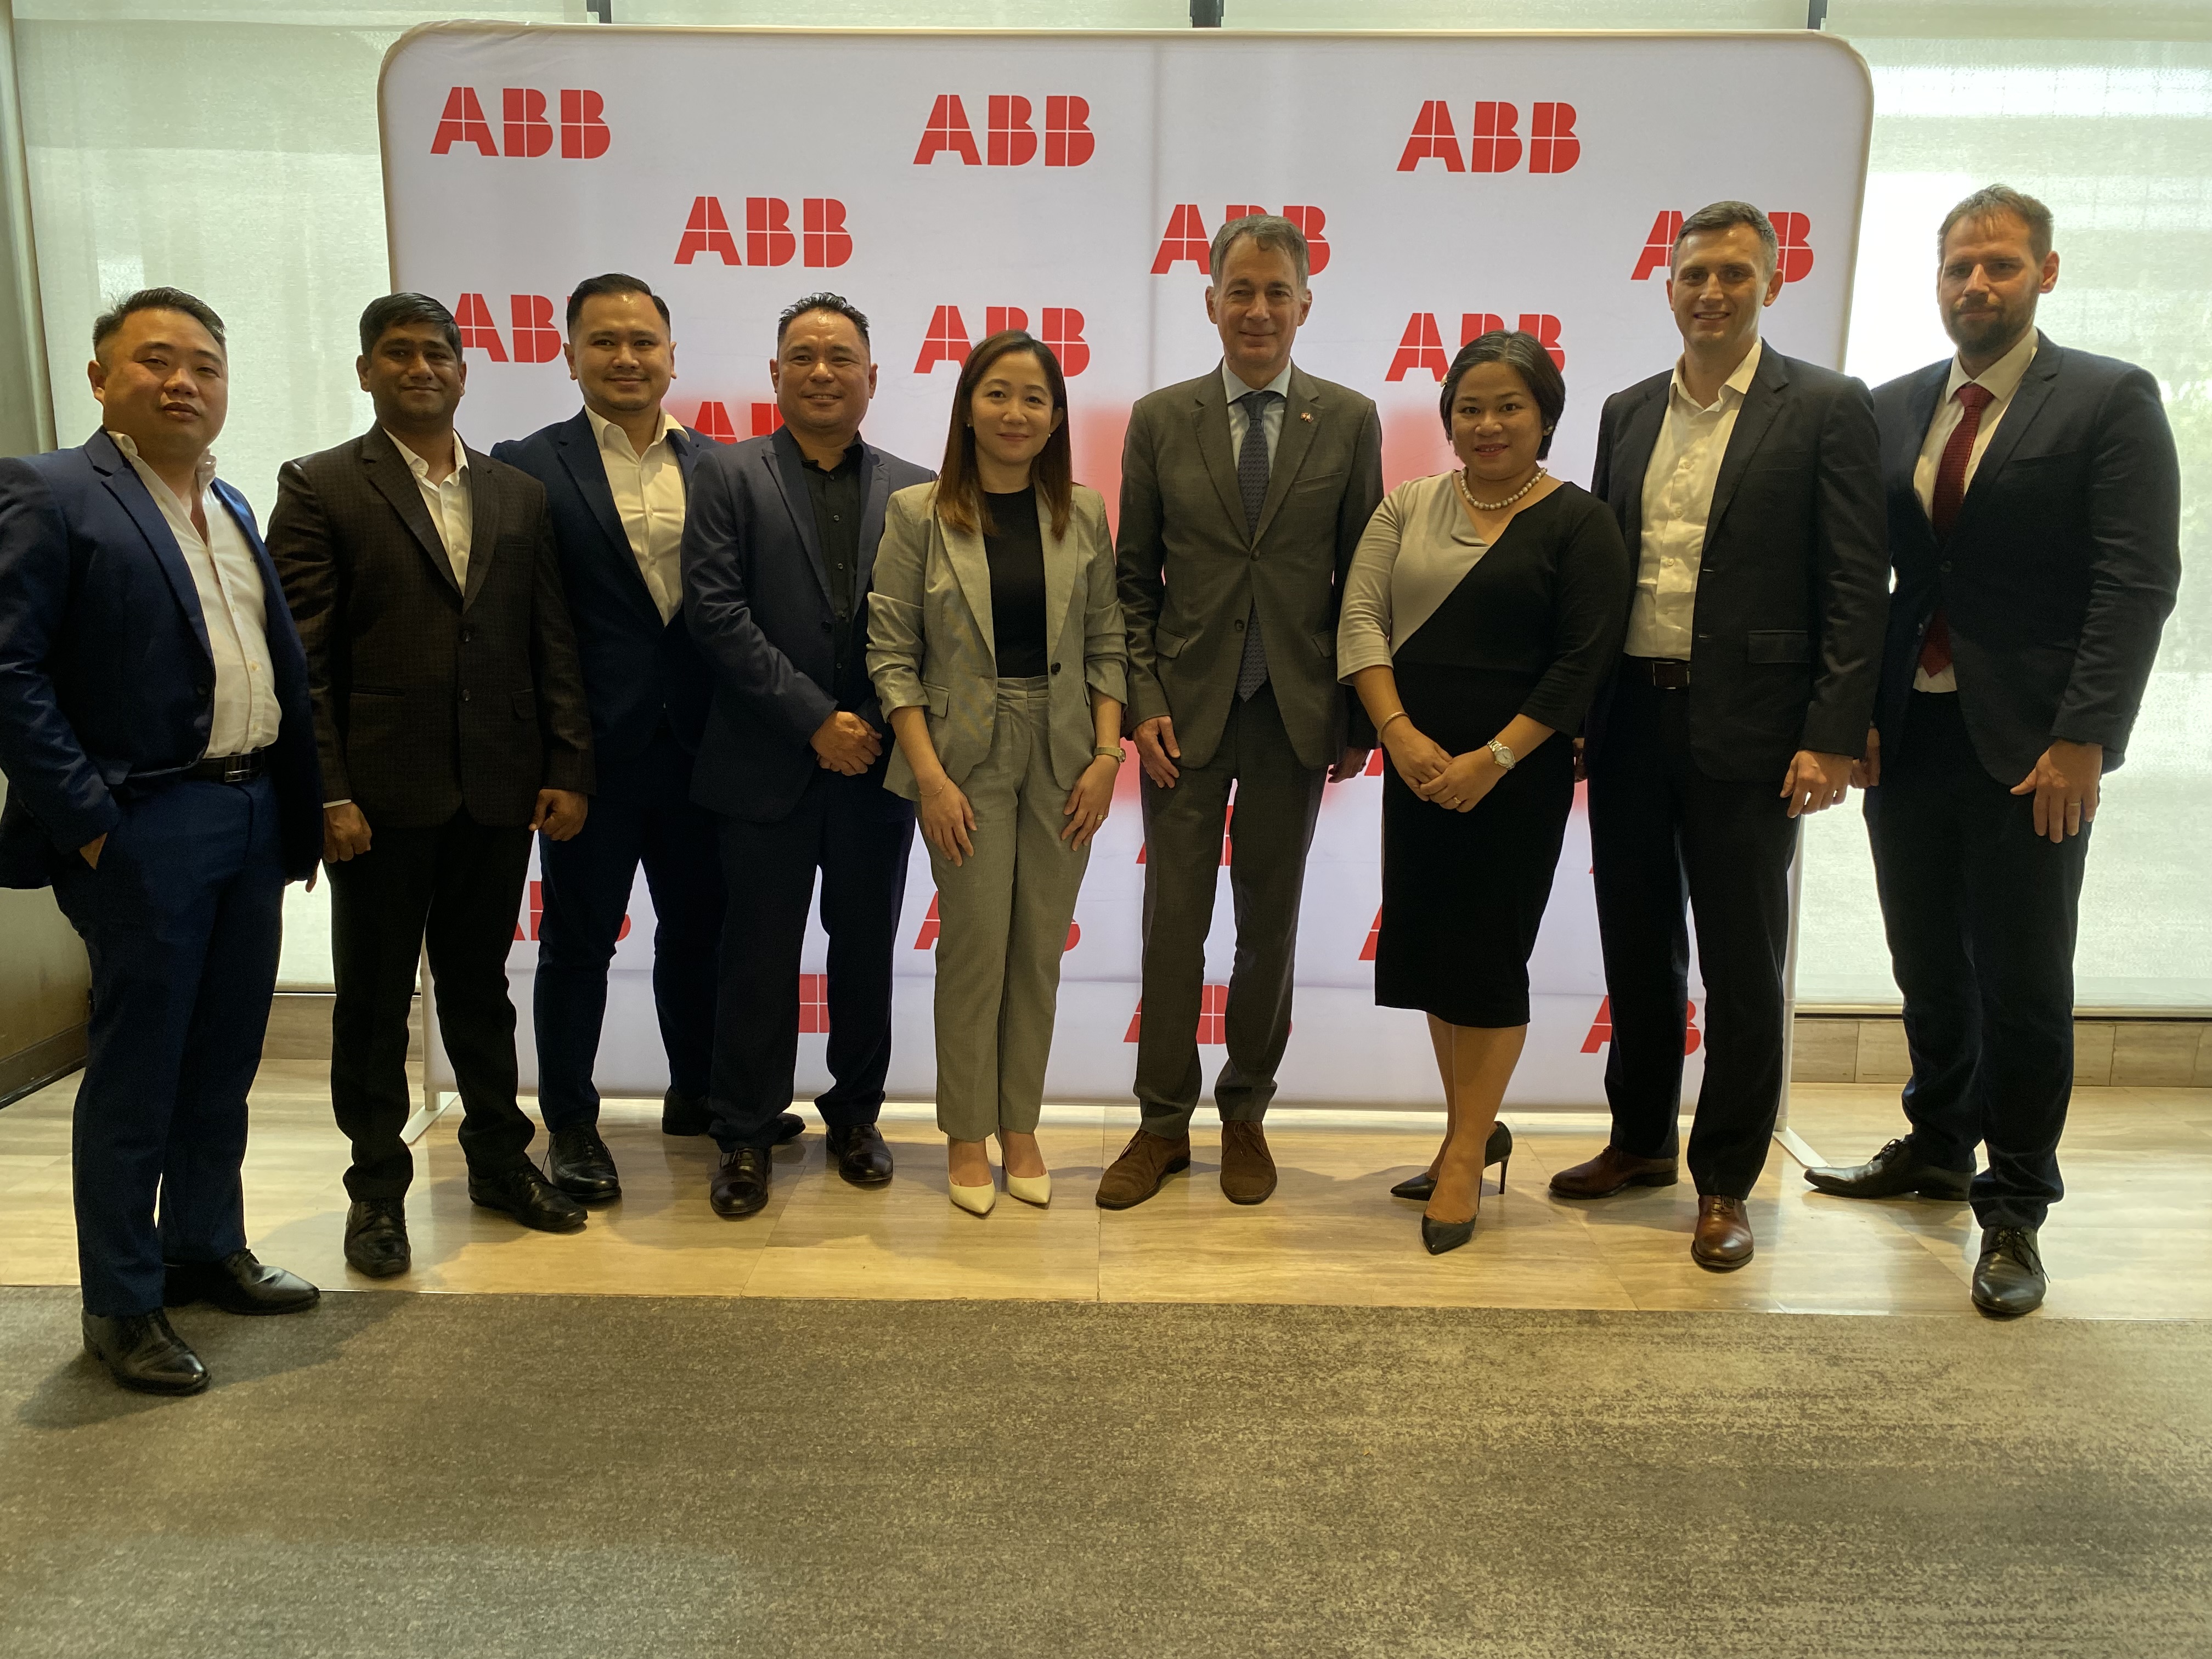 His Excellency, Alain Gasche, Ambassador of Switzerland to the Philippines and ABB team.